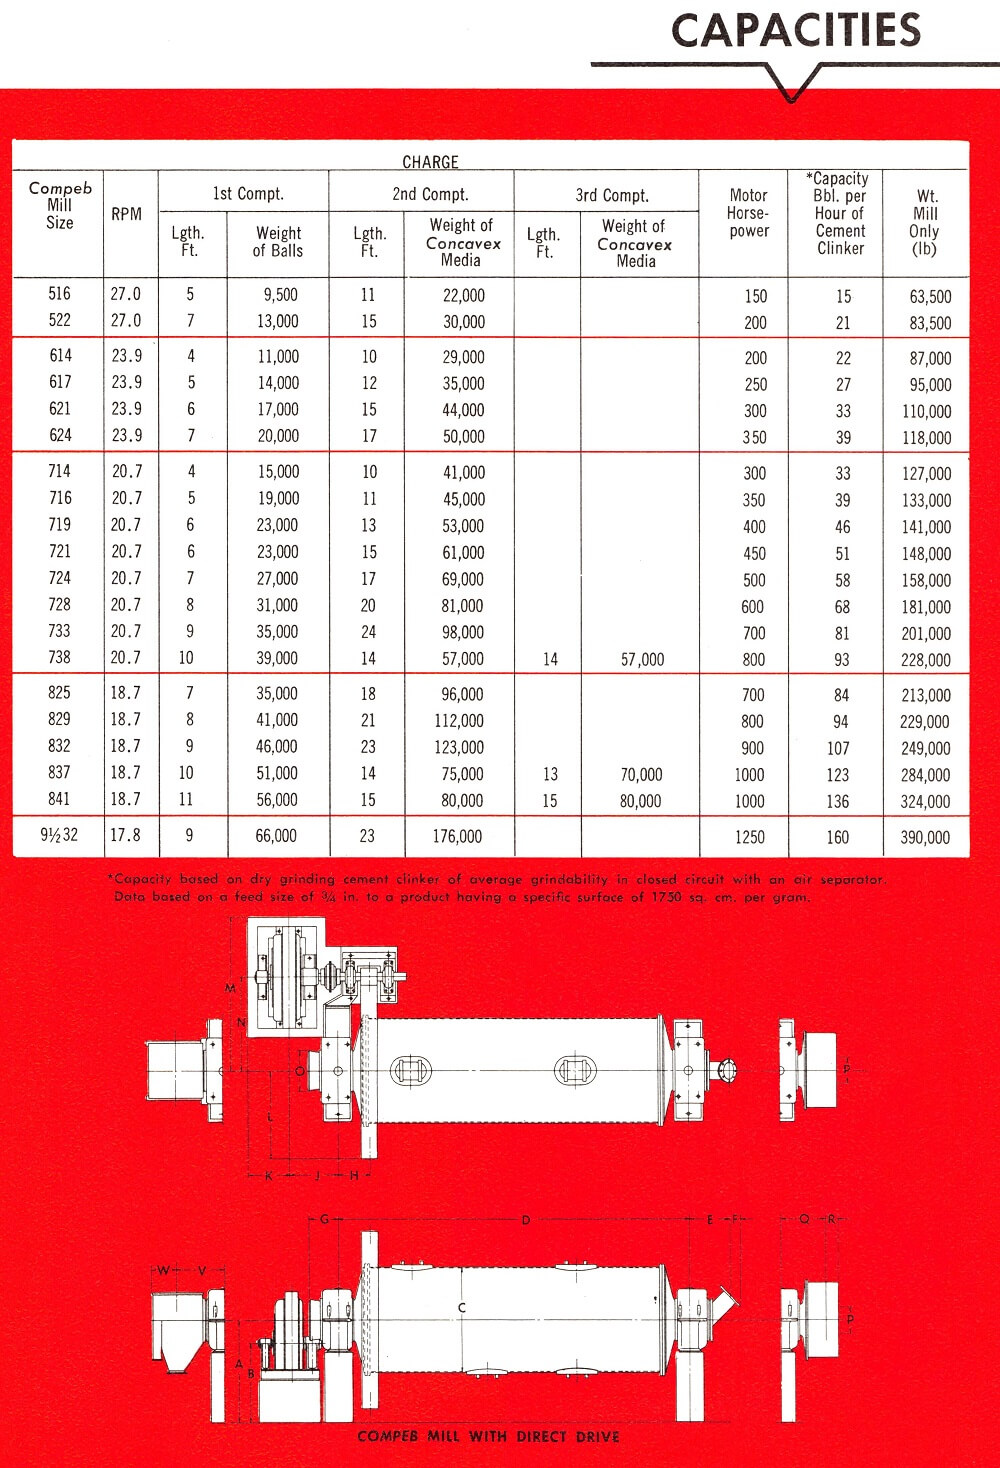 10-Compeb Mill capacity and charge sizing table